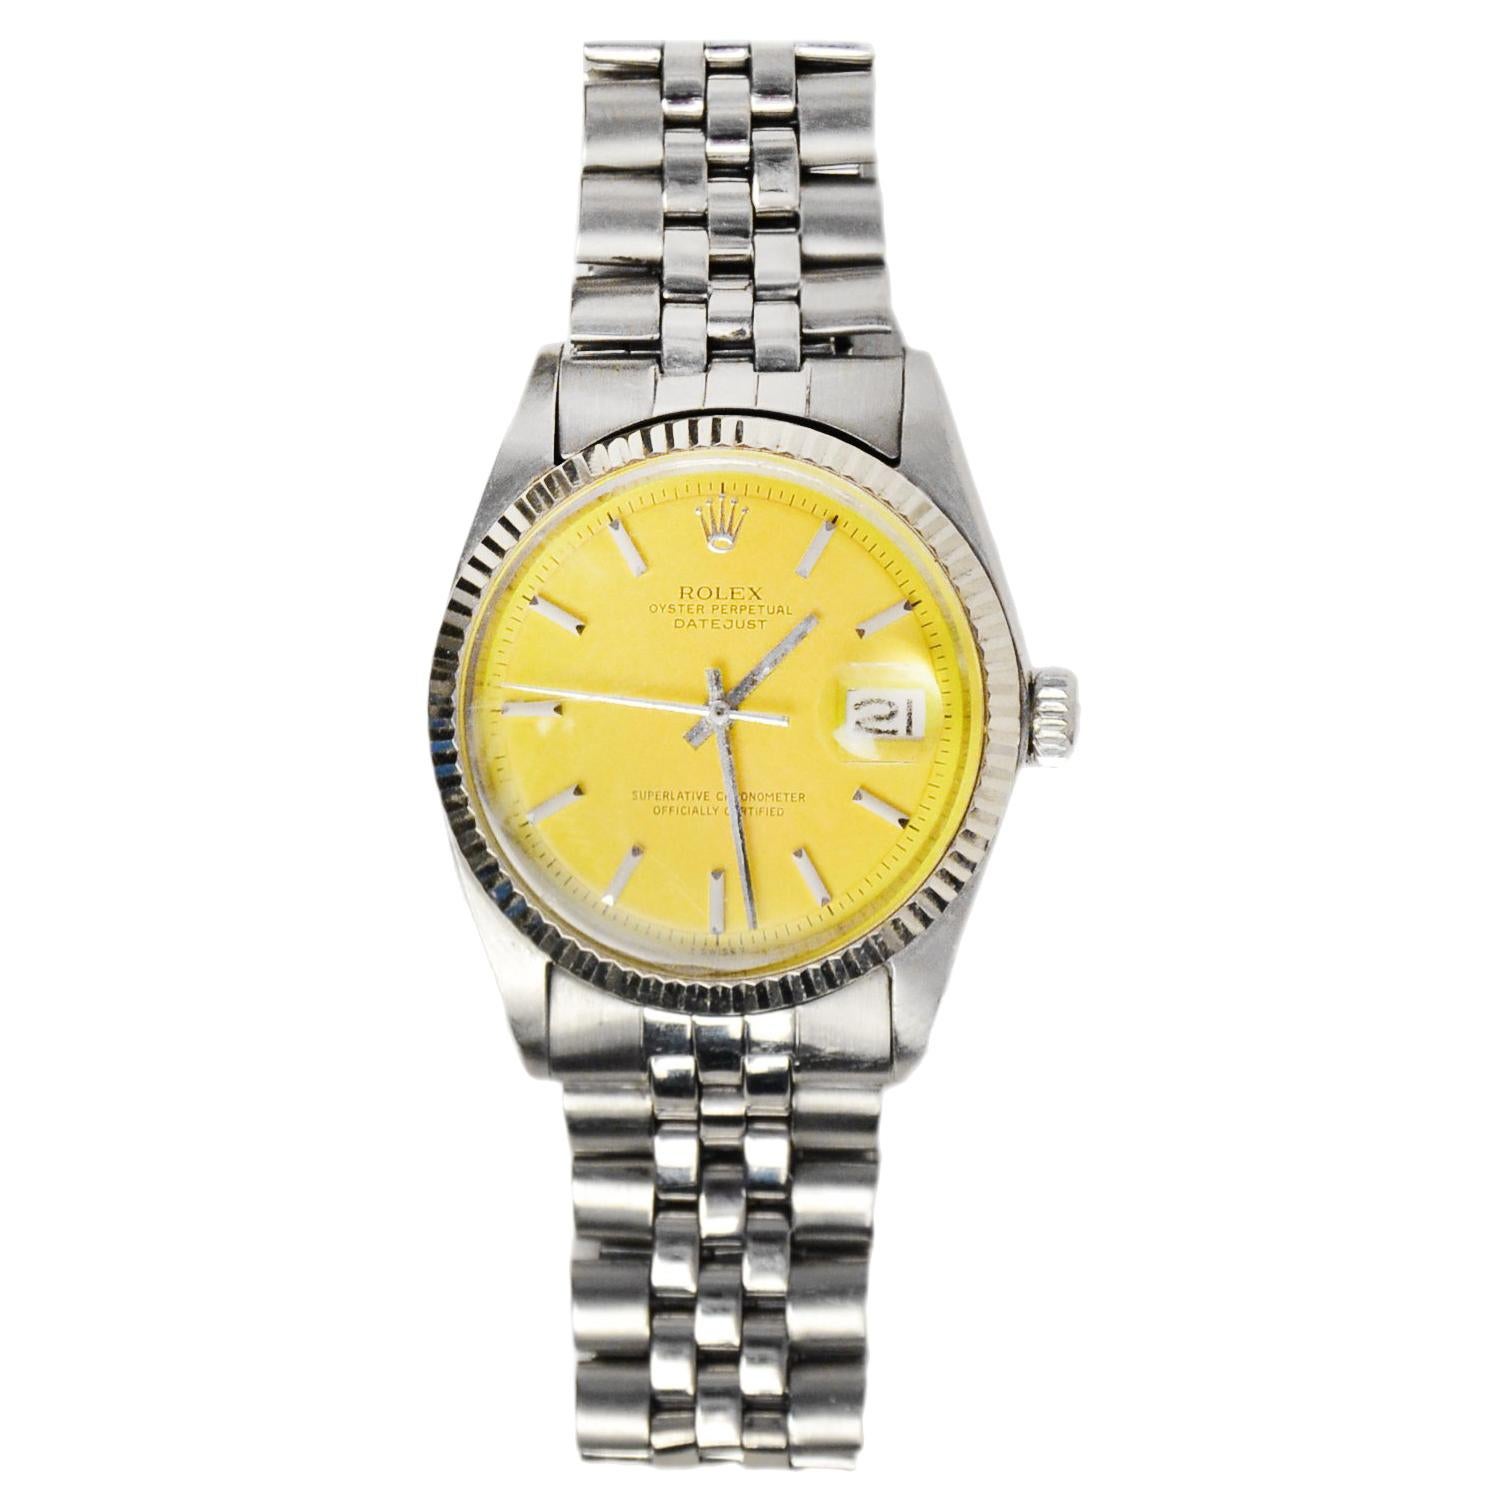 Rolex Vtg 1971 Stainless Steel Oyster Perpetual Date Just Watch W/ Yellow Face